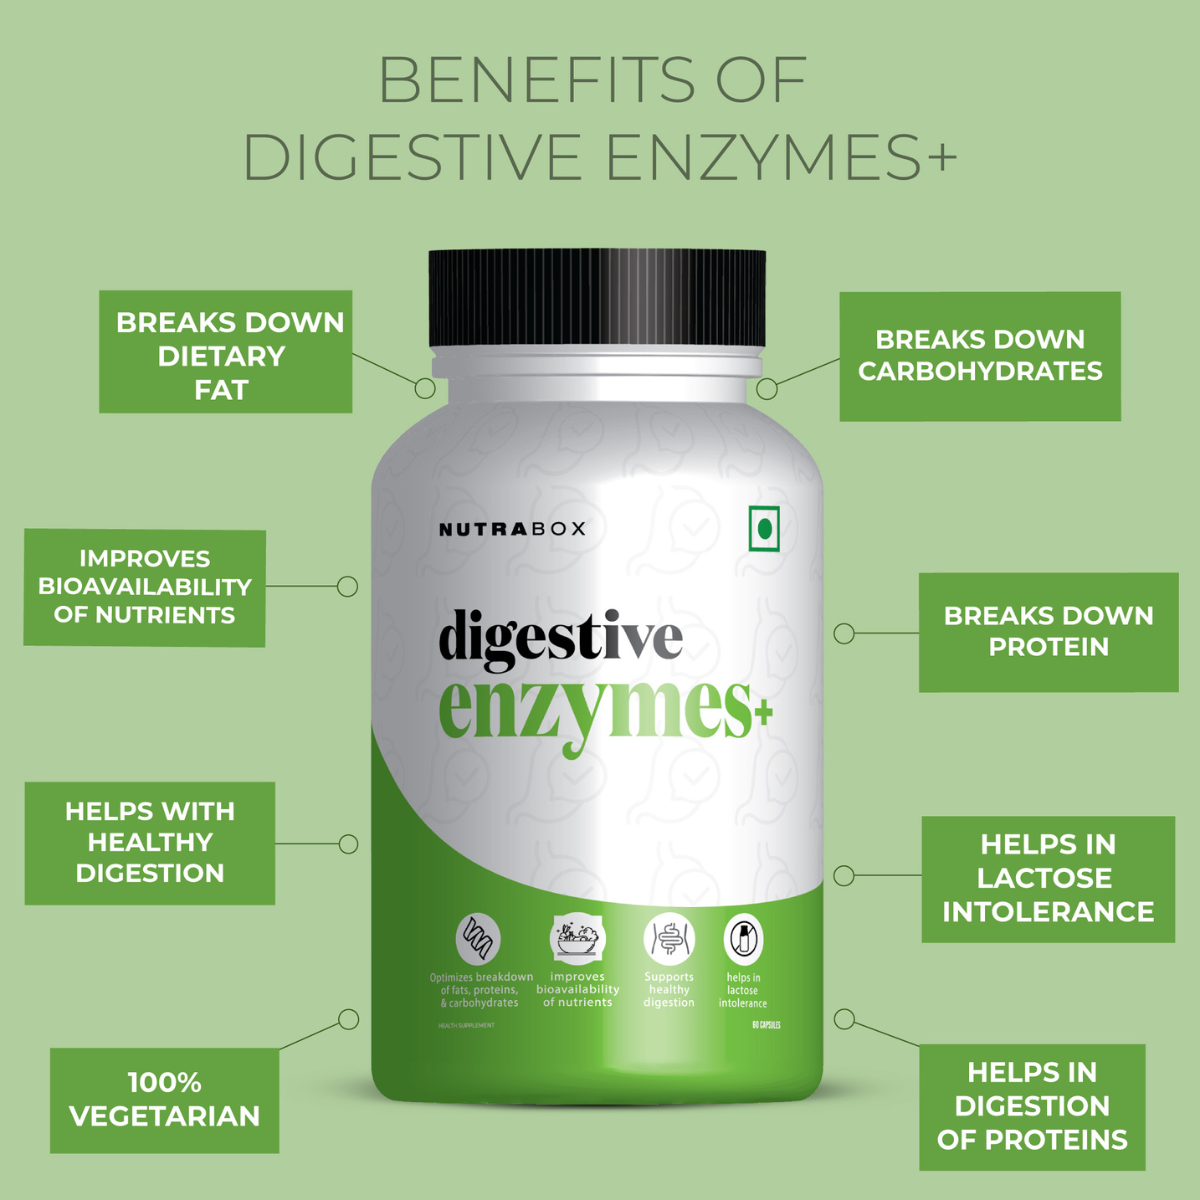 Nutrabox Digestive Enzymes+ Capsules (60 capsules)